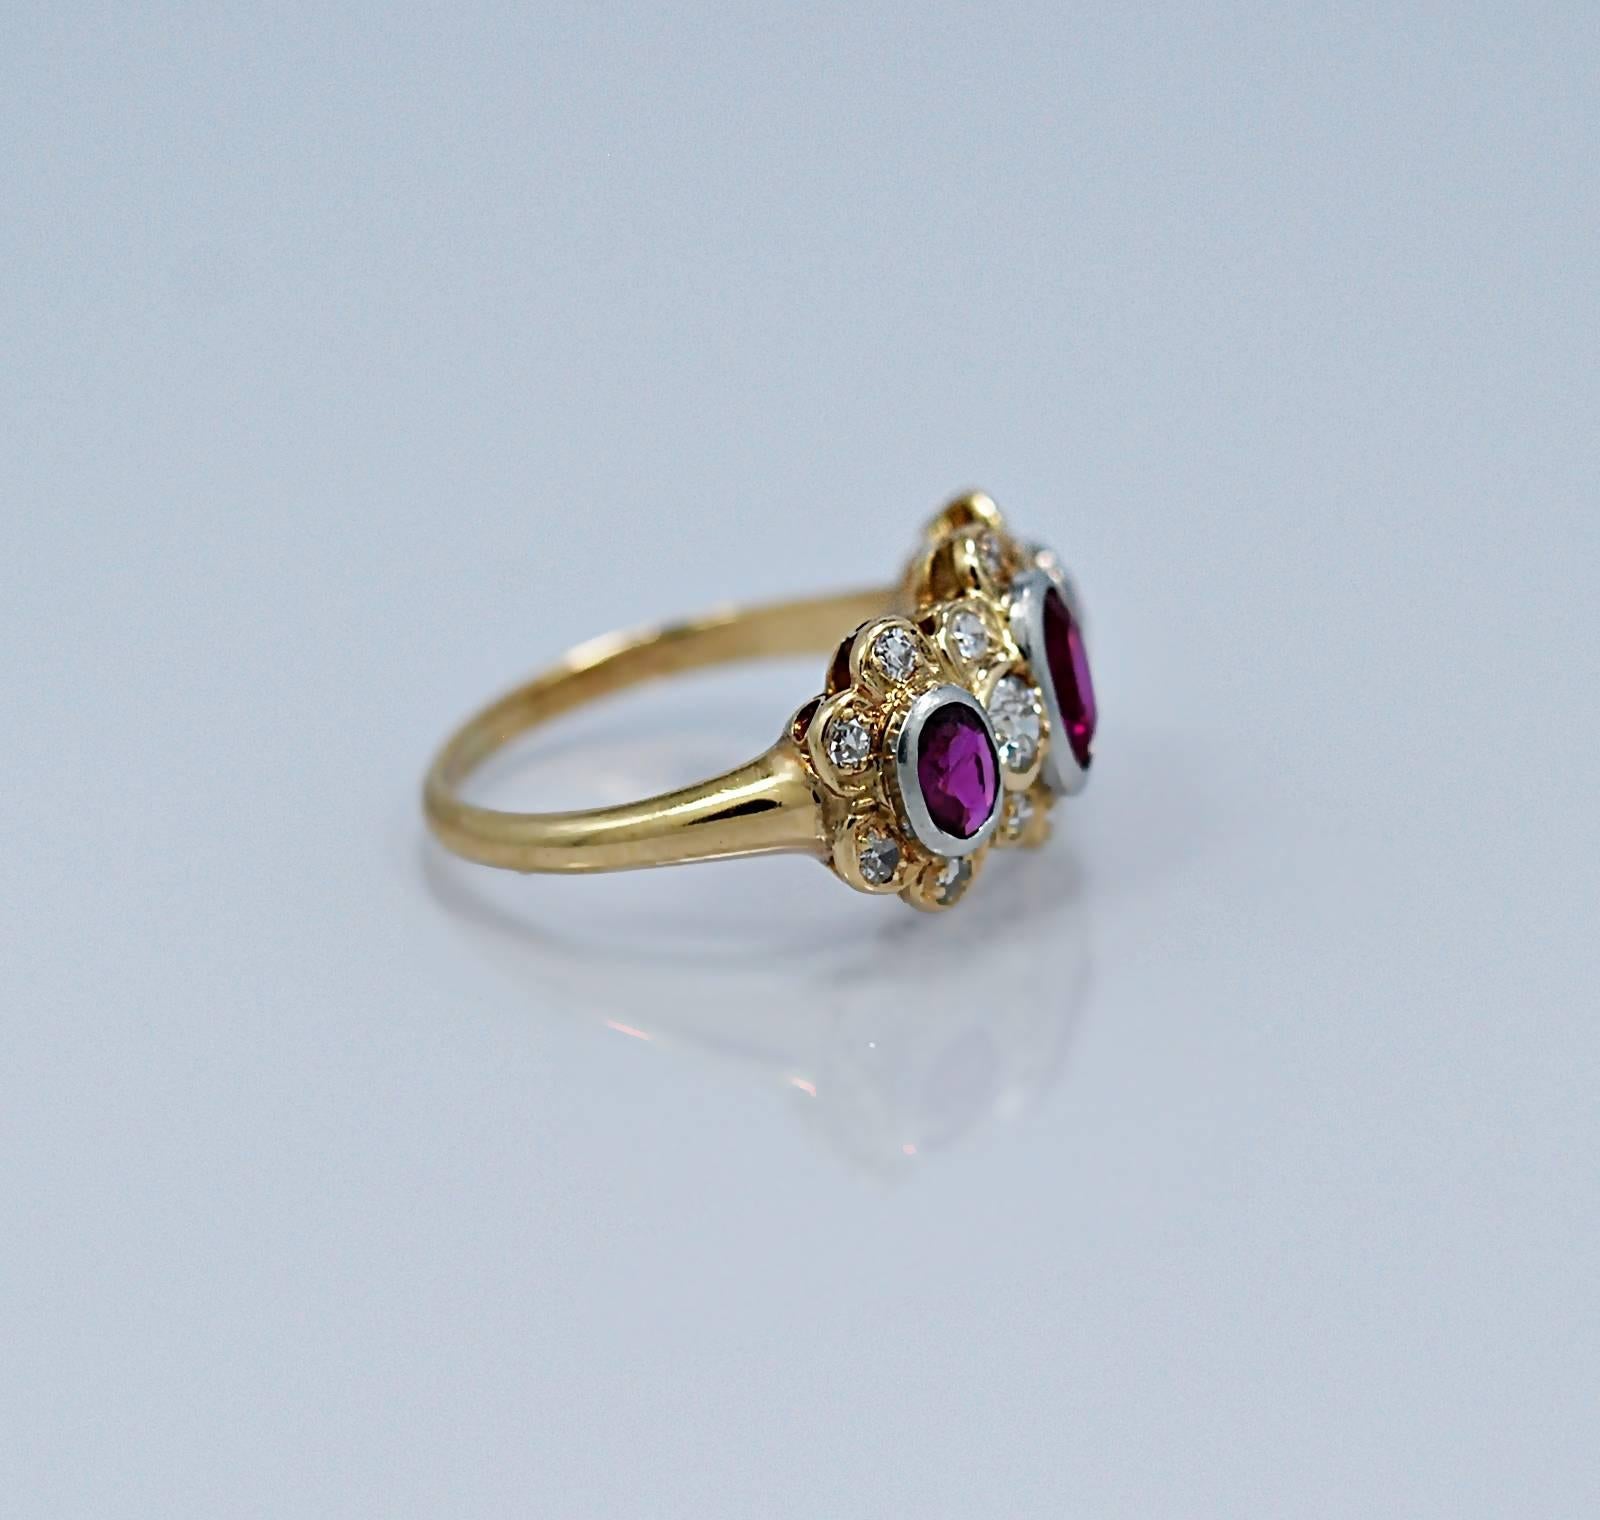 A striking 14k yellow gold ruby and diamond Edwardian engagement or fashion ring features 1.35ct. apx. T.W. of natural, unheated rubies of very high quality and .75ct. apx. T.W. of European and single cut diamonds with VS1-VS2 clarity and G-H color.